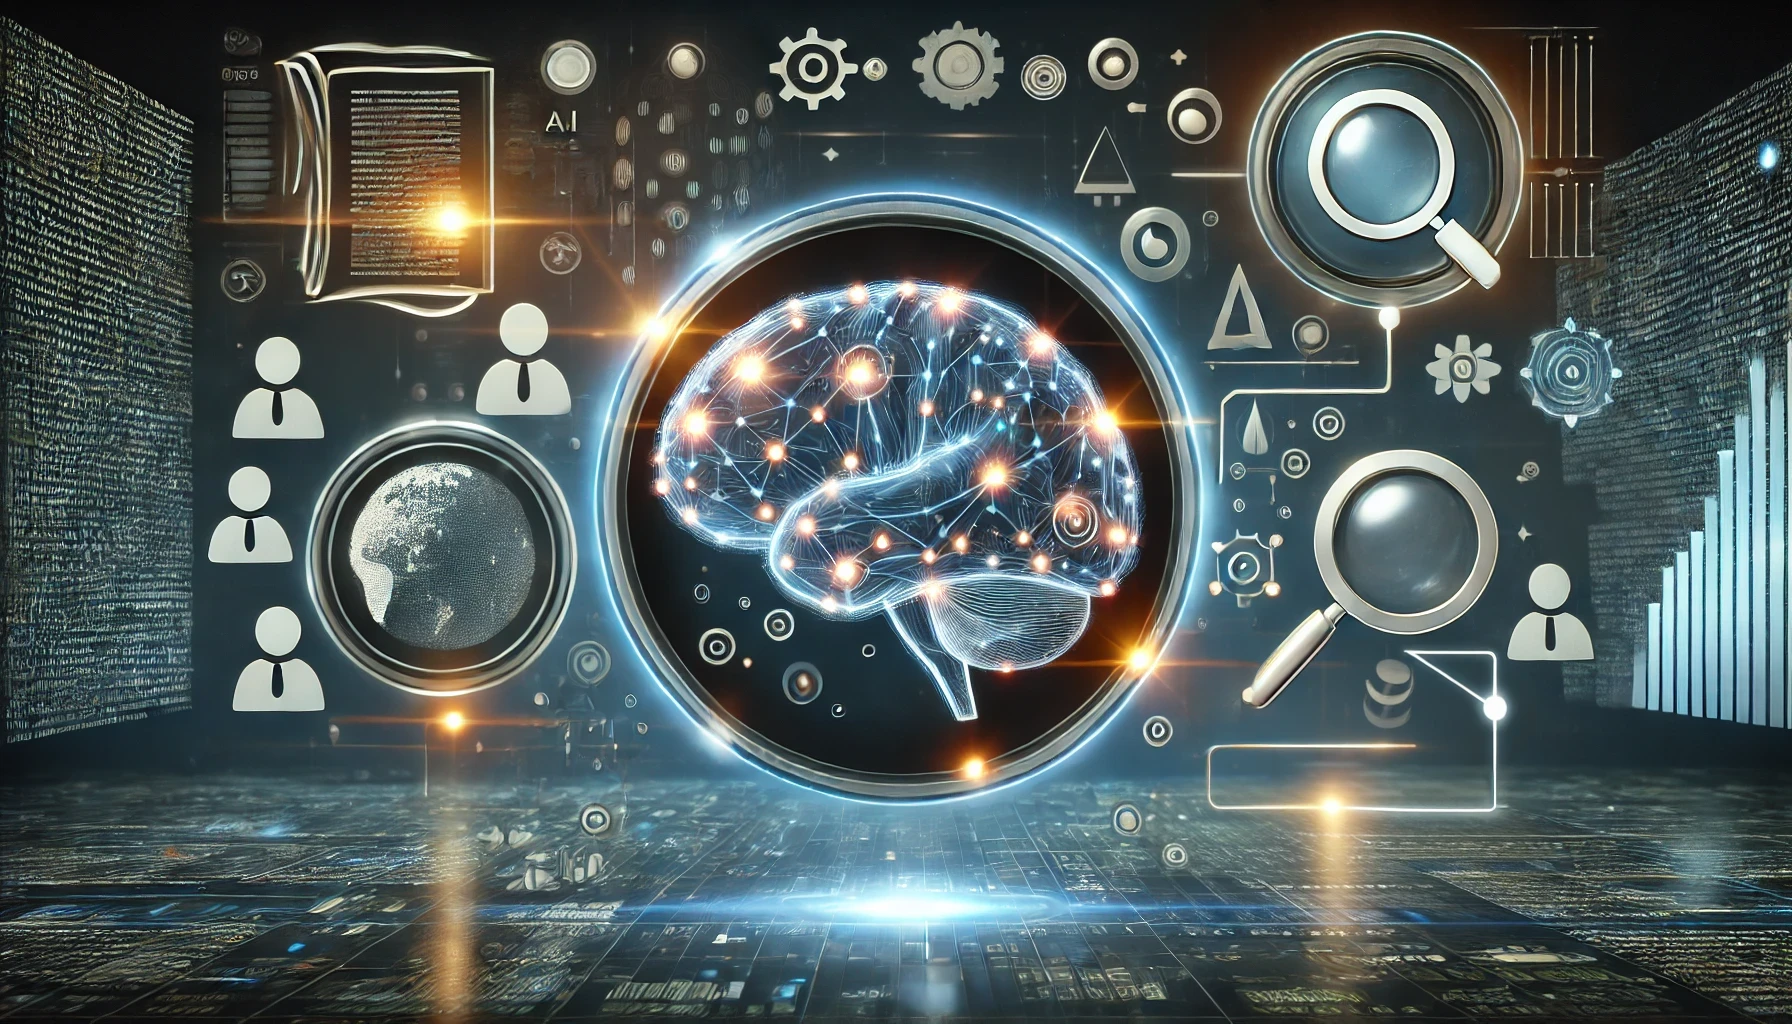 Modern digital interface showcasing advanced AI techniques, featuring a glowing brain symbolizing a large language model (LLM) at the center, surrounded by icons representing retrieval-augmented generation (RAG) techniques such as a magnifying glass over a document and a search icon, with data streams and a globe in the background.